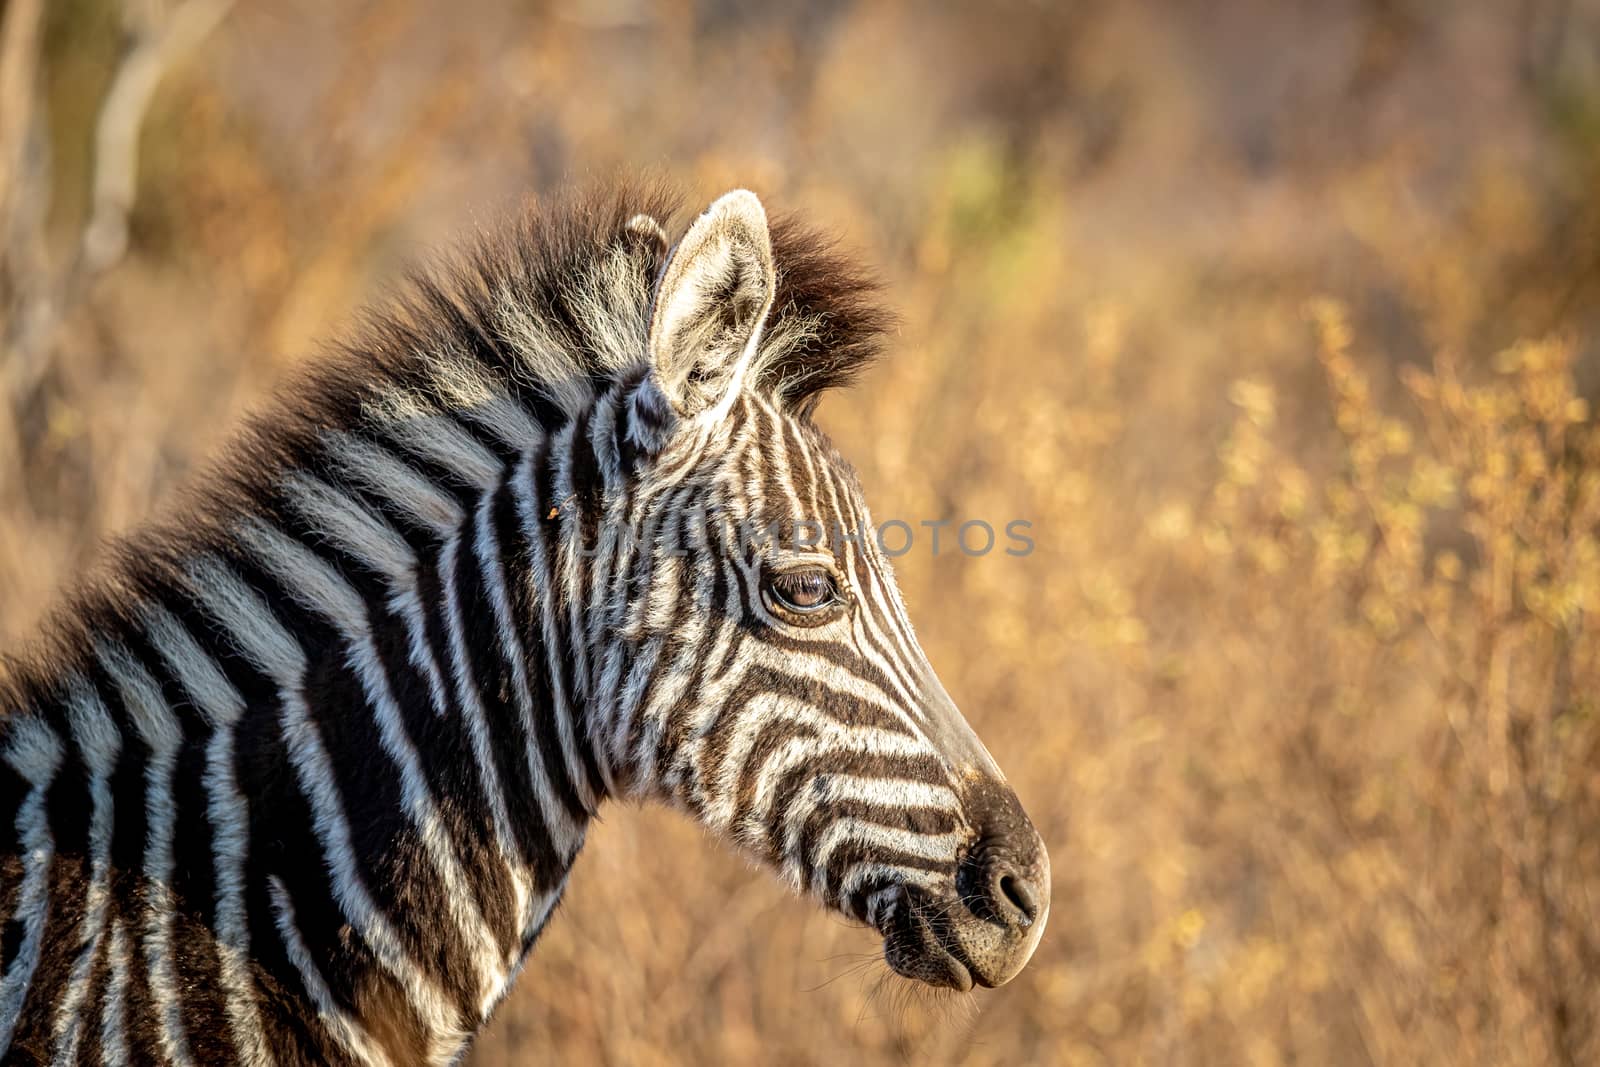 Close up of a young Zebra in the bush. by Simoneemanphotography